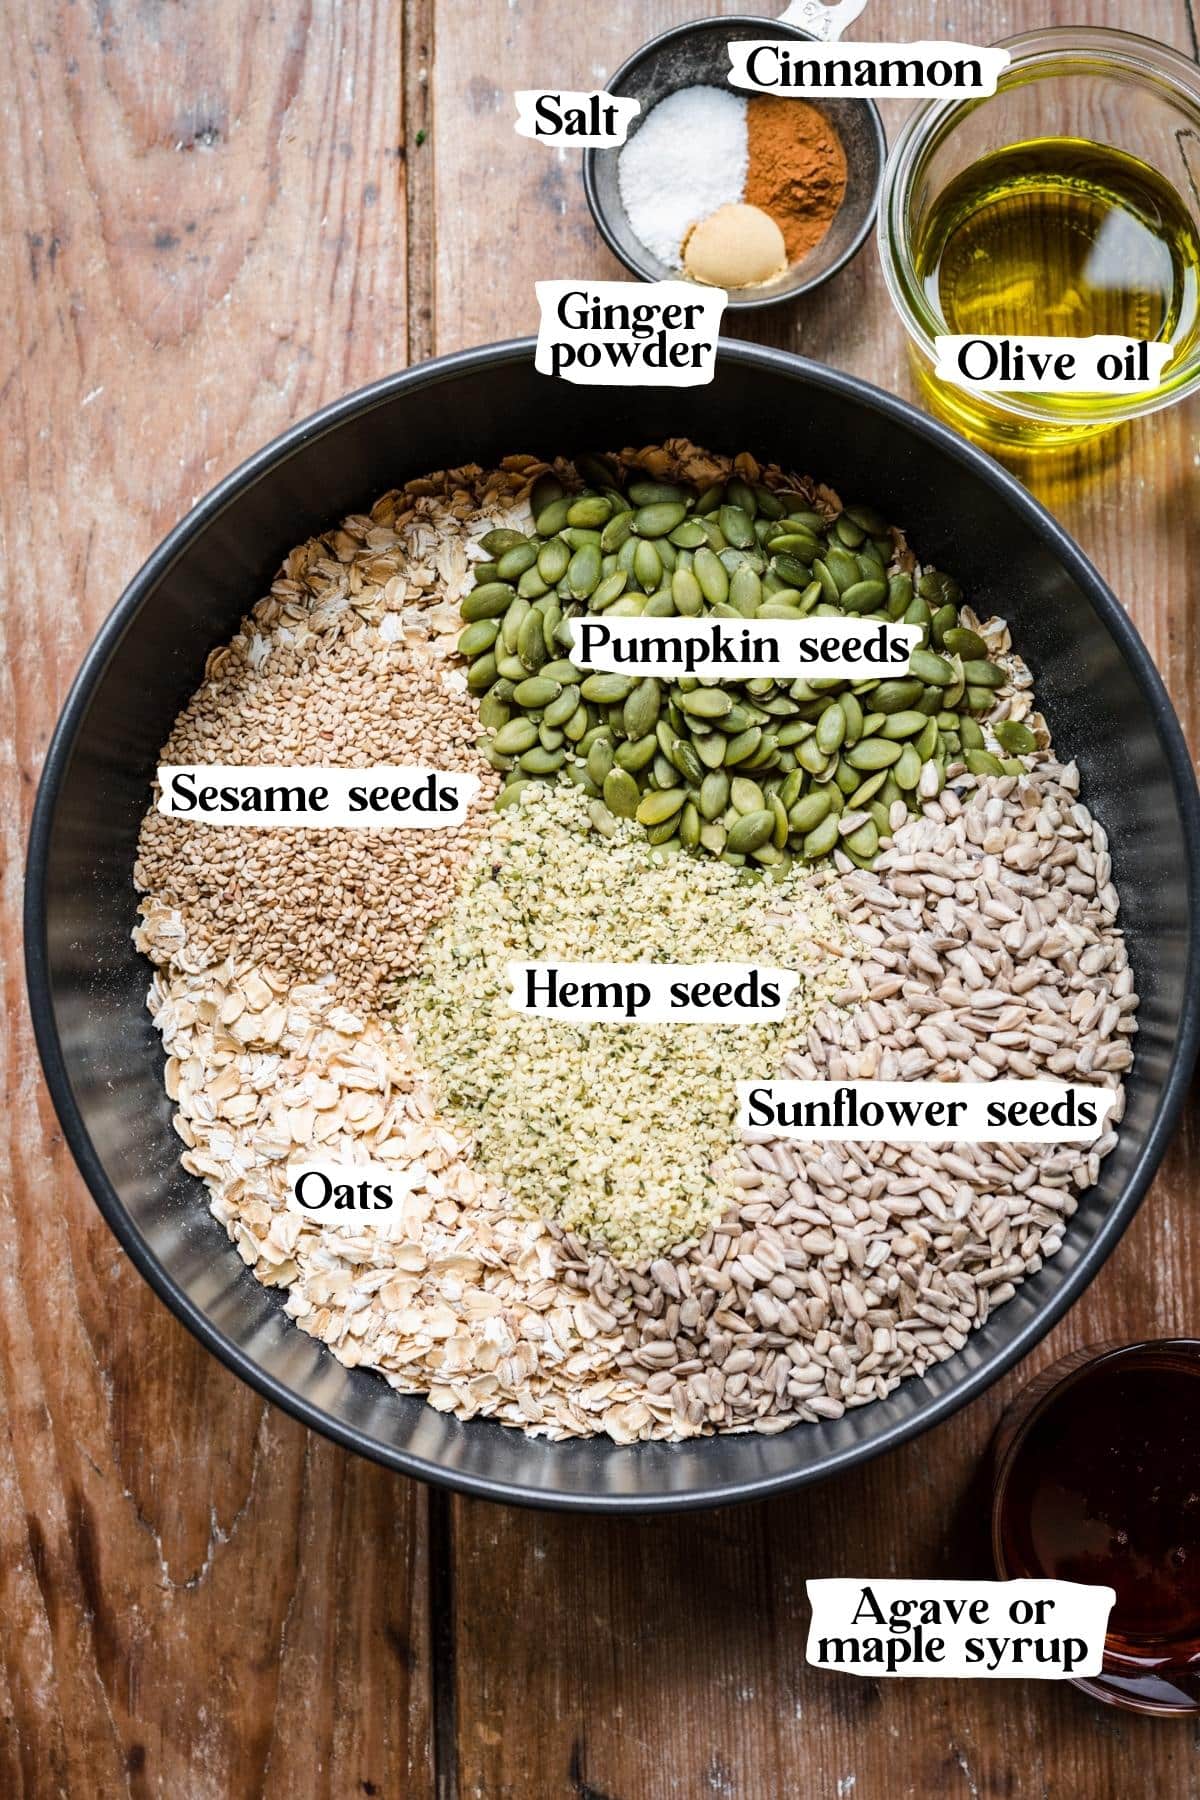 Overhead view of nut free granola ingredients, including sunflower seeds and oats.